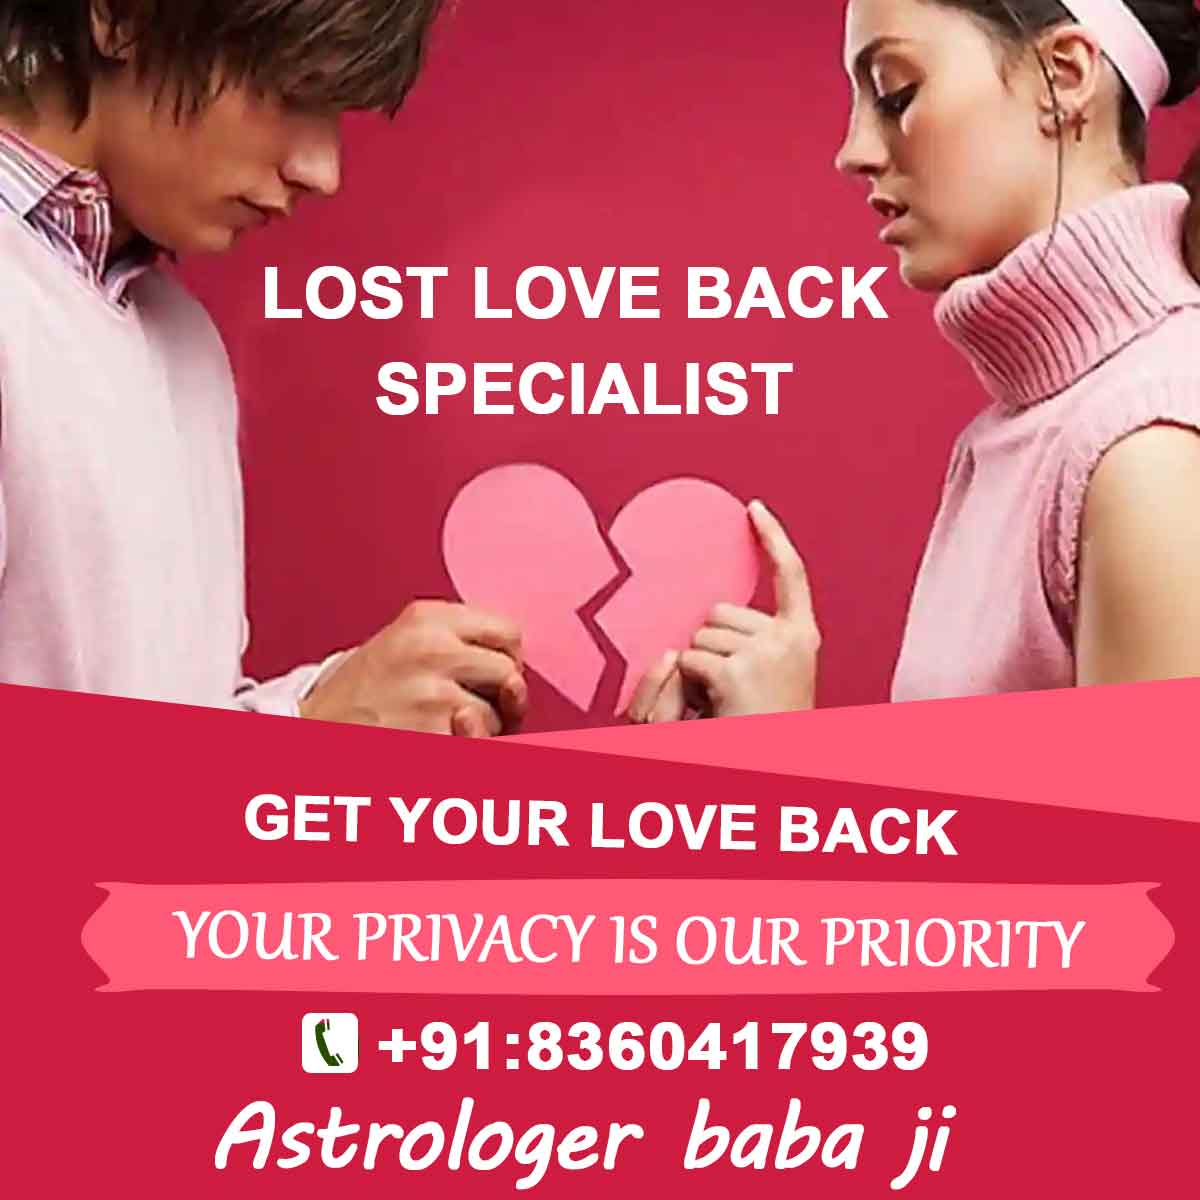 GET-YOUR-LOST-LOVE-BACK-24-HOURS